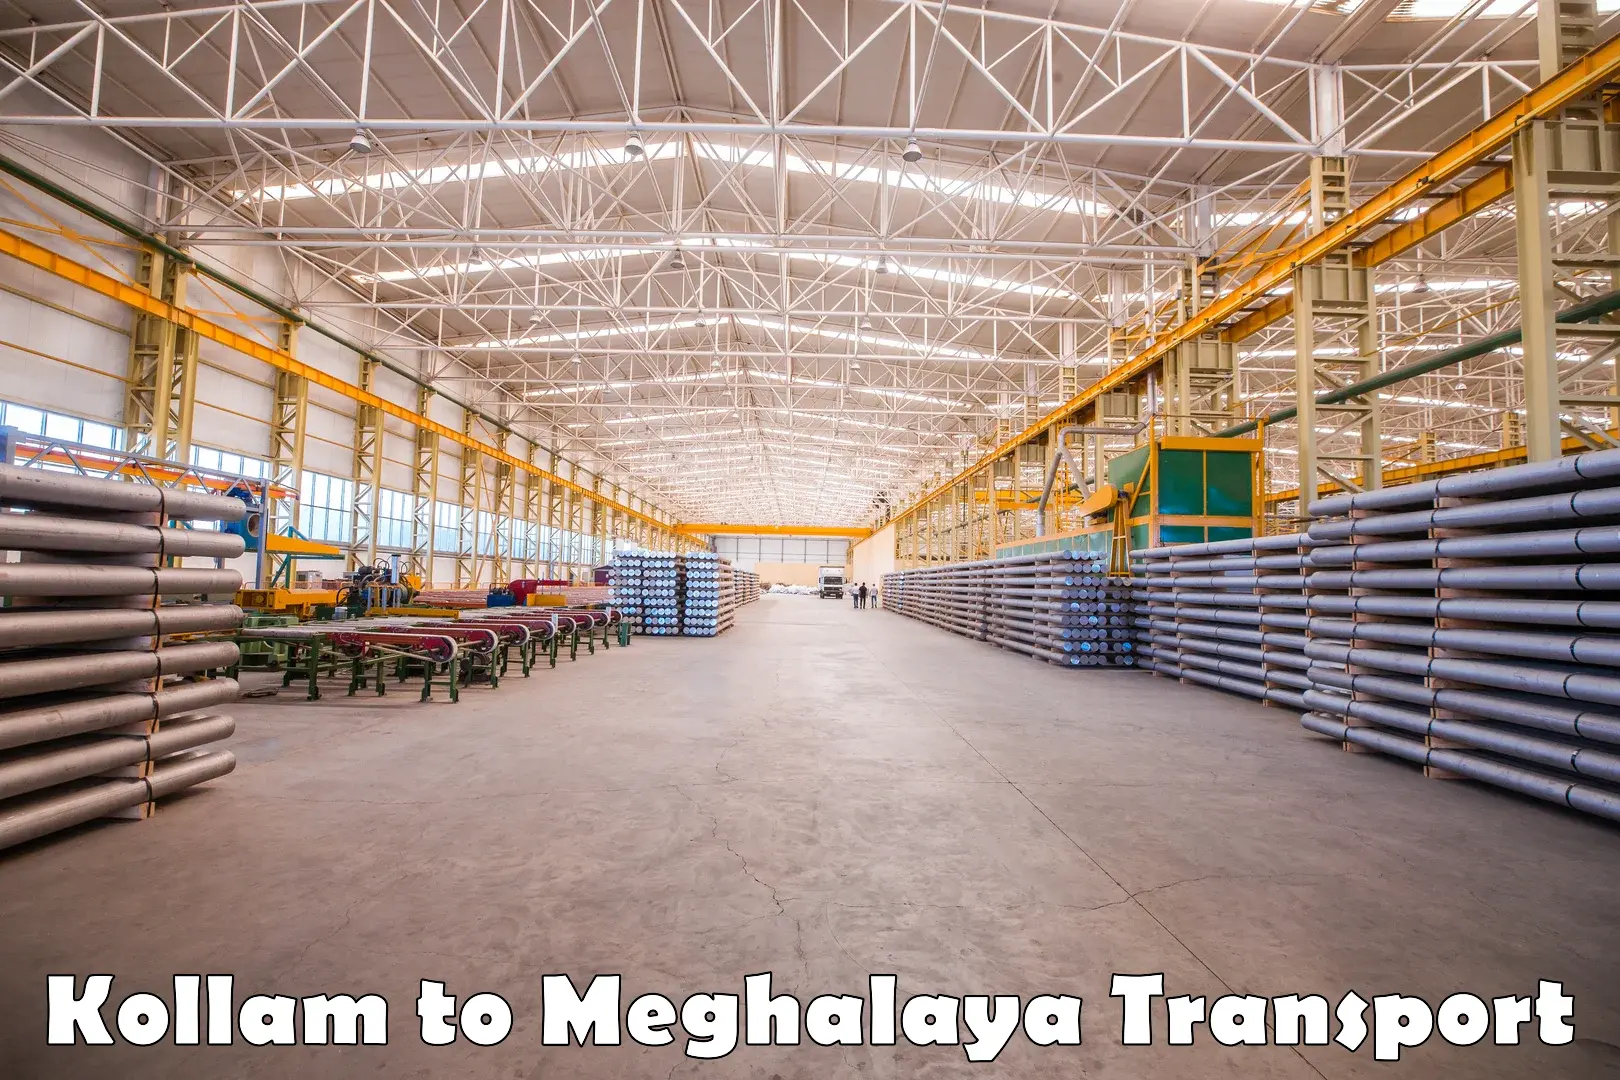 Transport bike from one state to another Kollam to Meghalaya